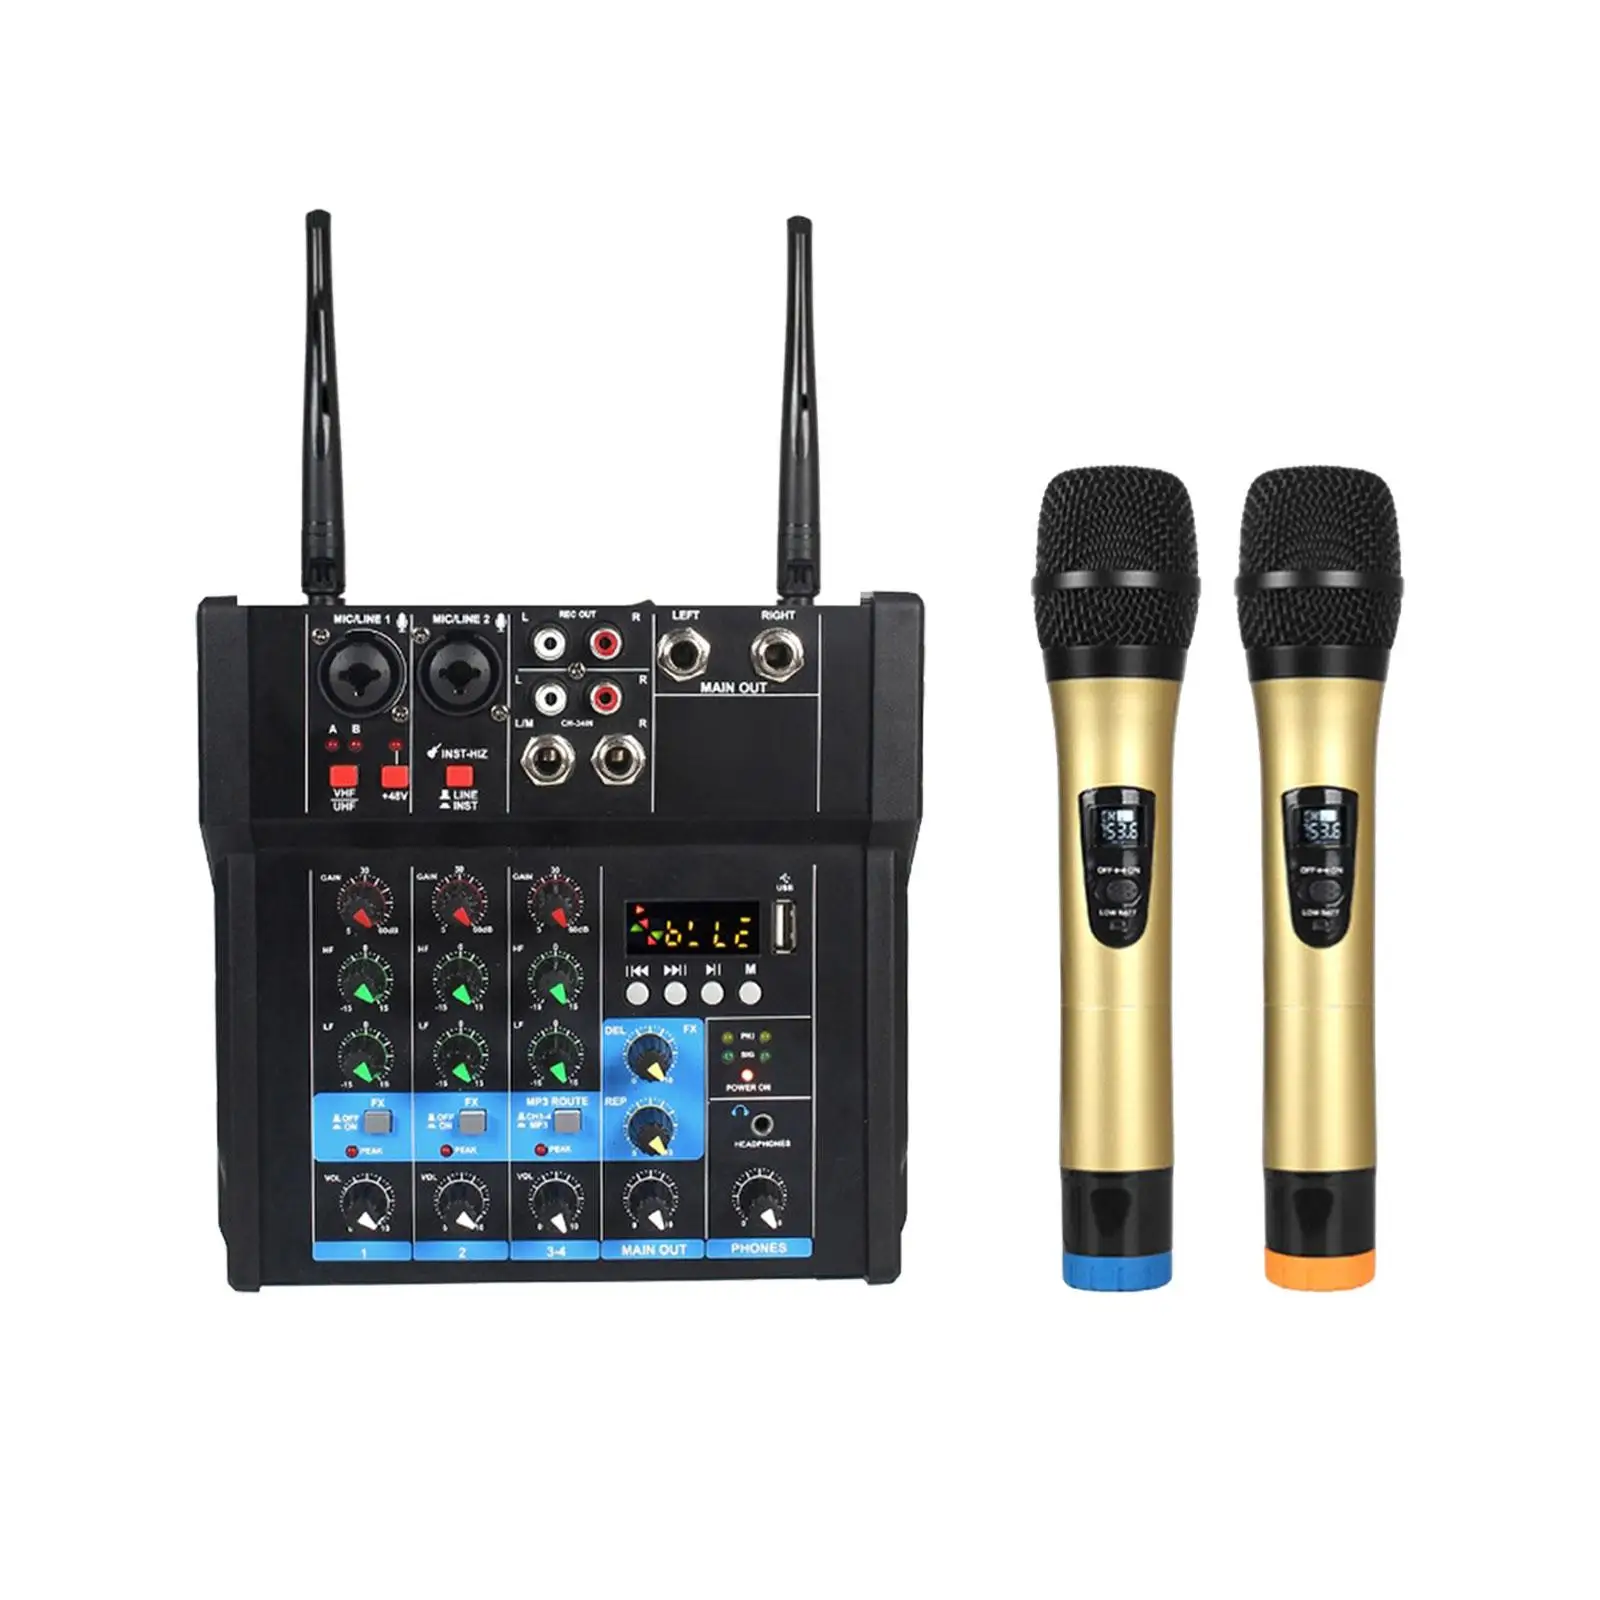 Audio Mixer with 2 Wireless Microphones USB 4 Channel Sound Mixer for Studio Computer Recording Home Karaoke KTV Live Streaming